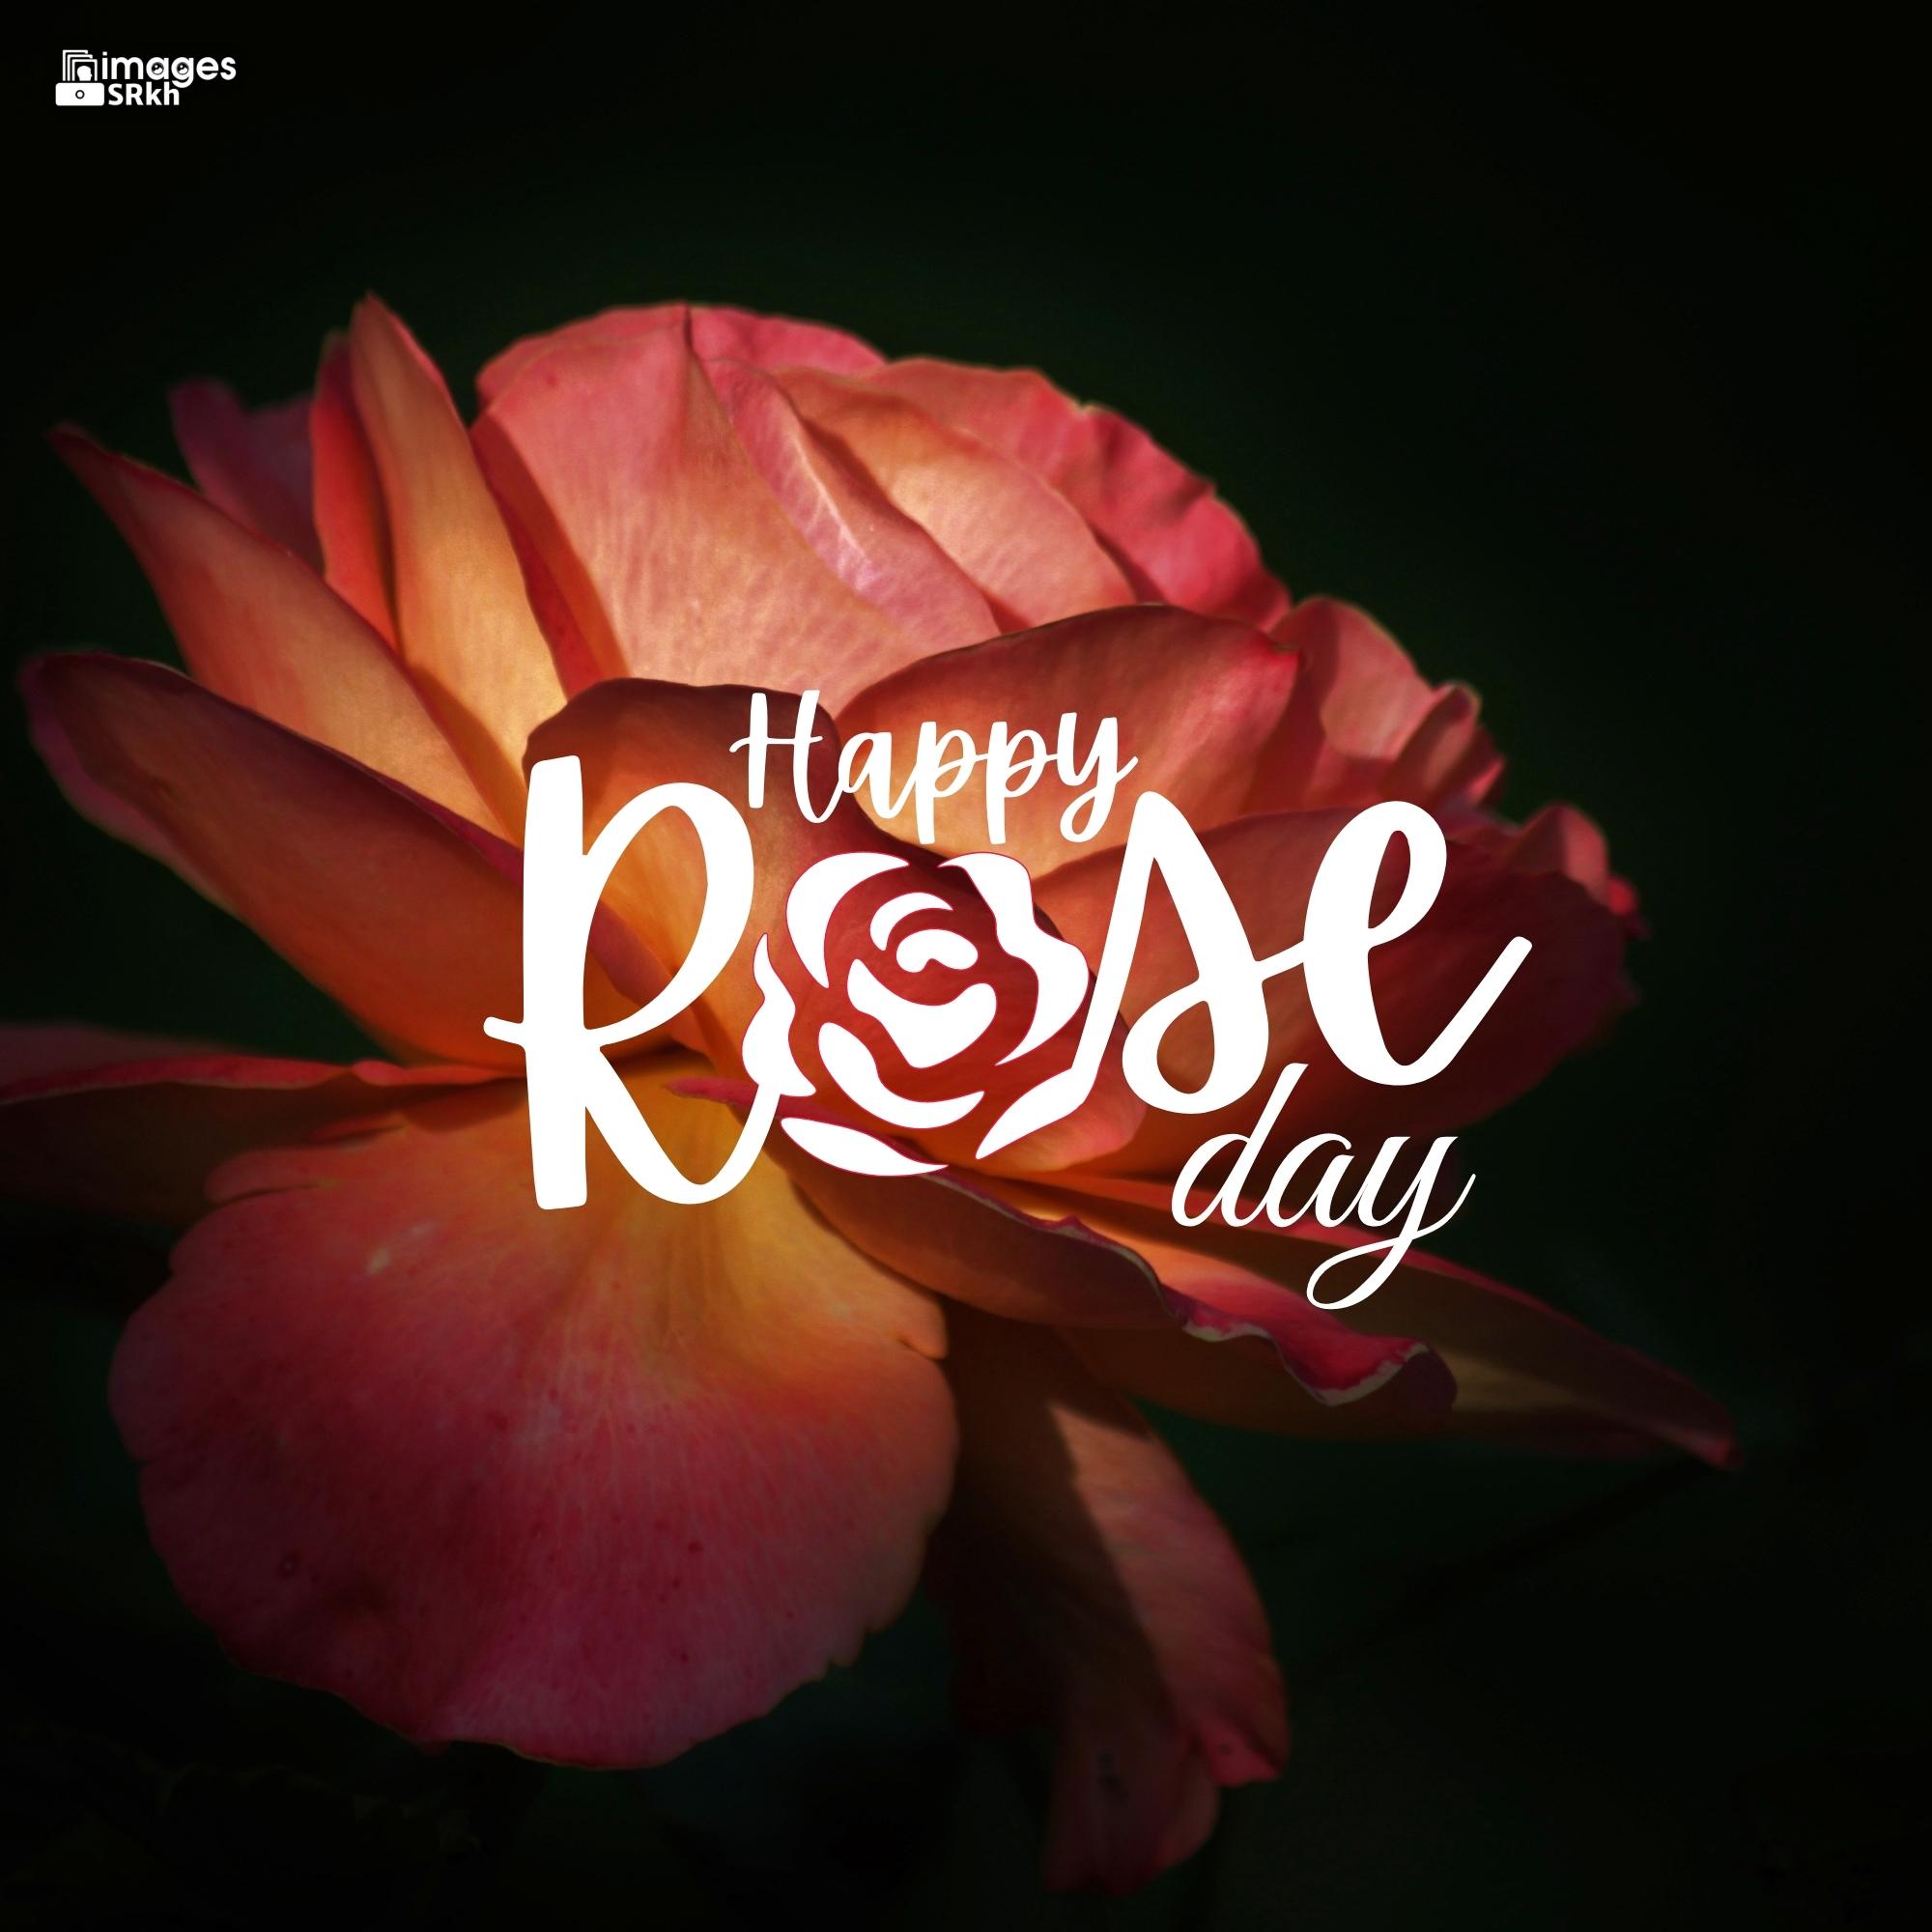 Happy Rose Day Image Hd Download (28)